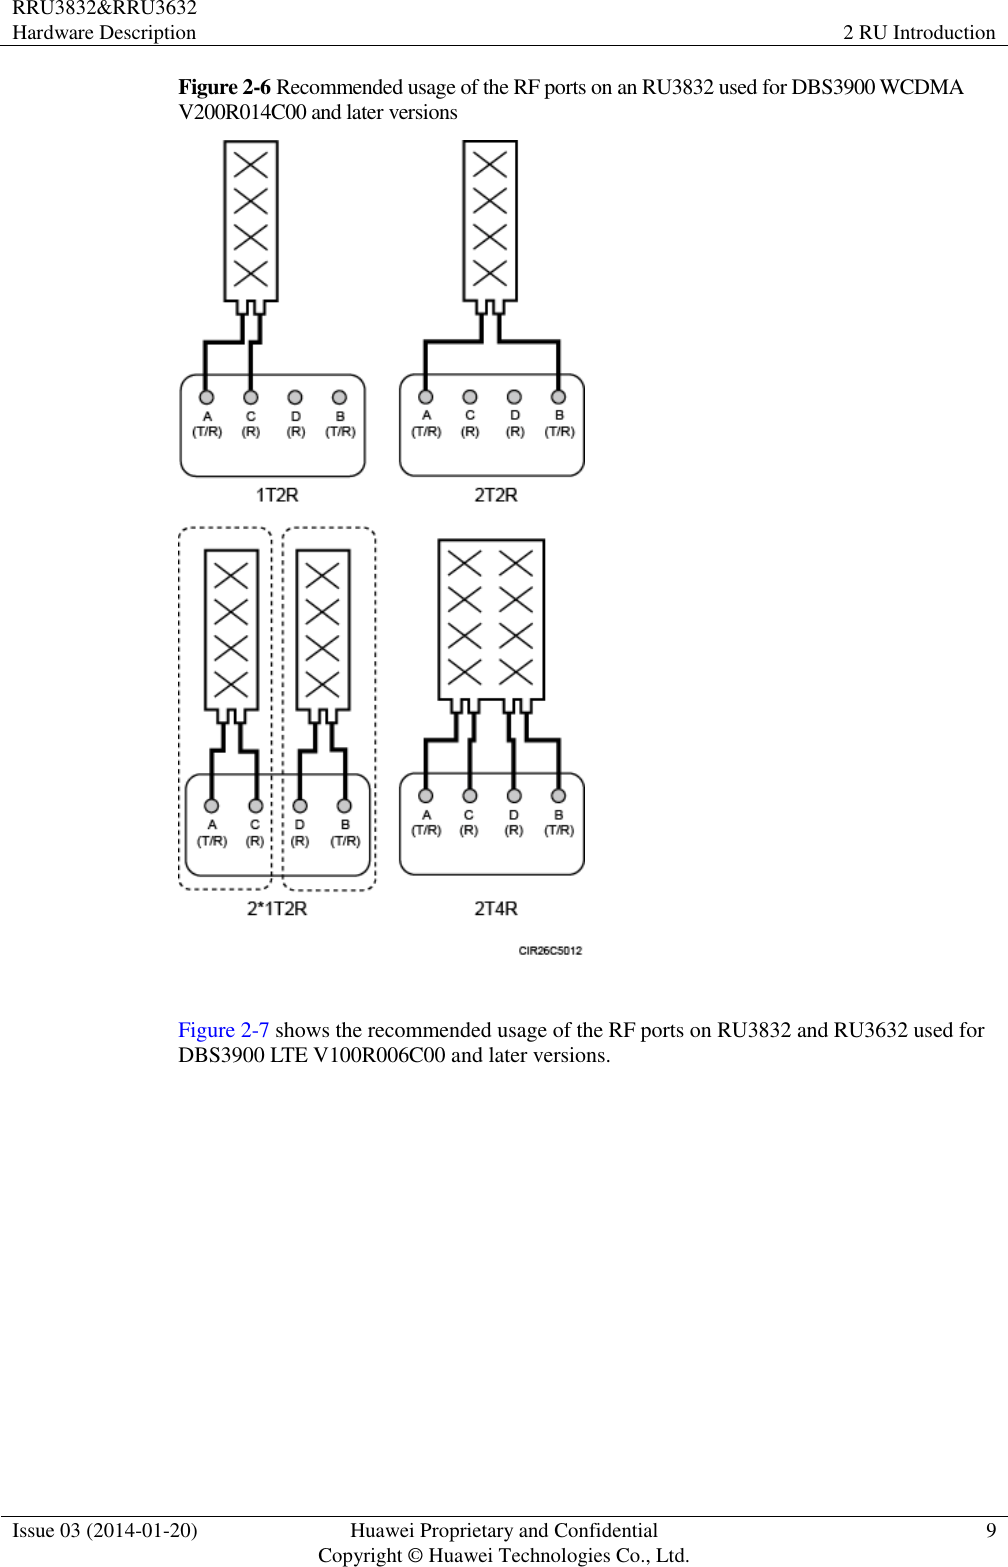 RRU3832&amp;RRU3632 Hardware Description 2 RU Introduction  Issue 03 (2014-01-20) Huawei Proprietary and Confidential                                     Copyright © Huawei Technologies Co., Ltd. 9  Figure 2-6 Recommended usage of the RF ports on an RU3832 used for DBS3900 WCDMA V200R014C00 and later versions   Figure 2-7 shows the recommended usage of the RF ports on RU3832 and RU3632 used for DBS3900 LTE V100R006C00 and later versions. 